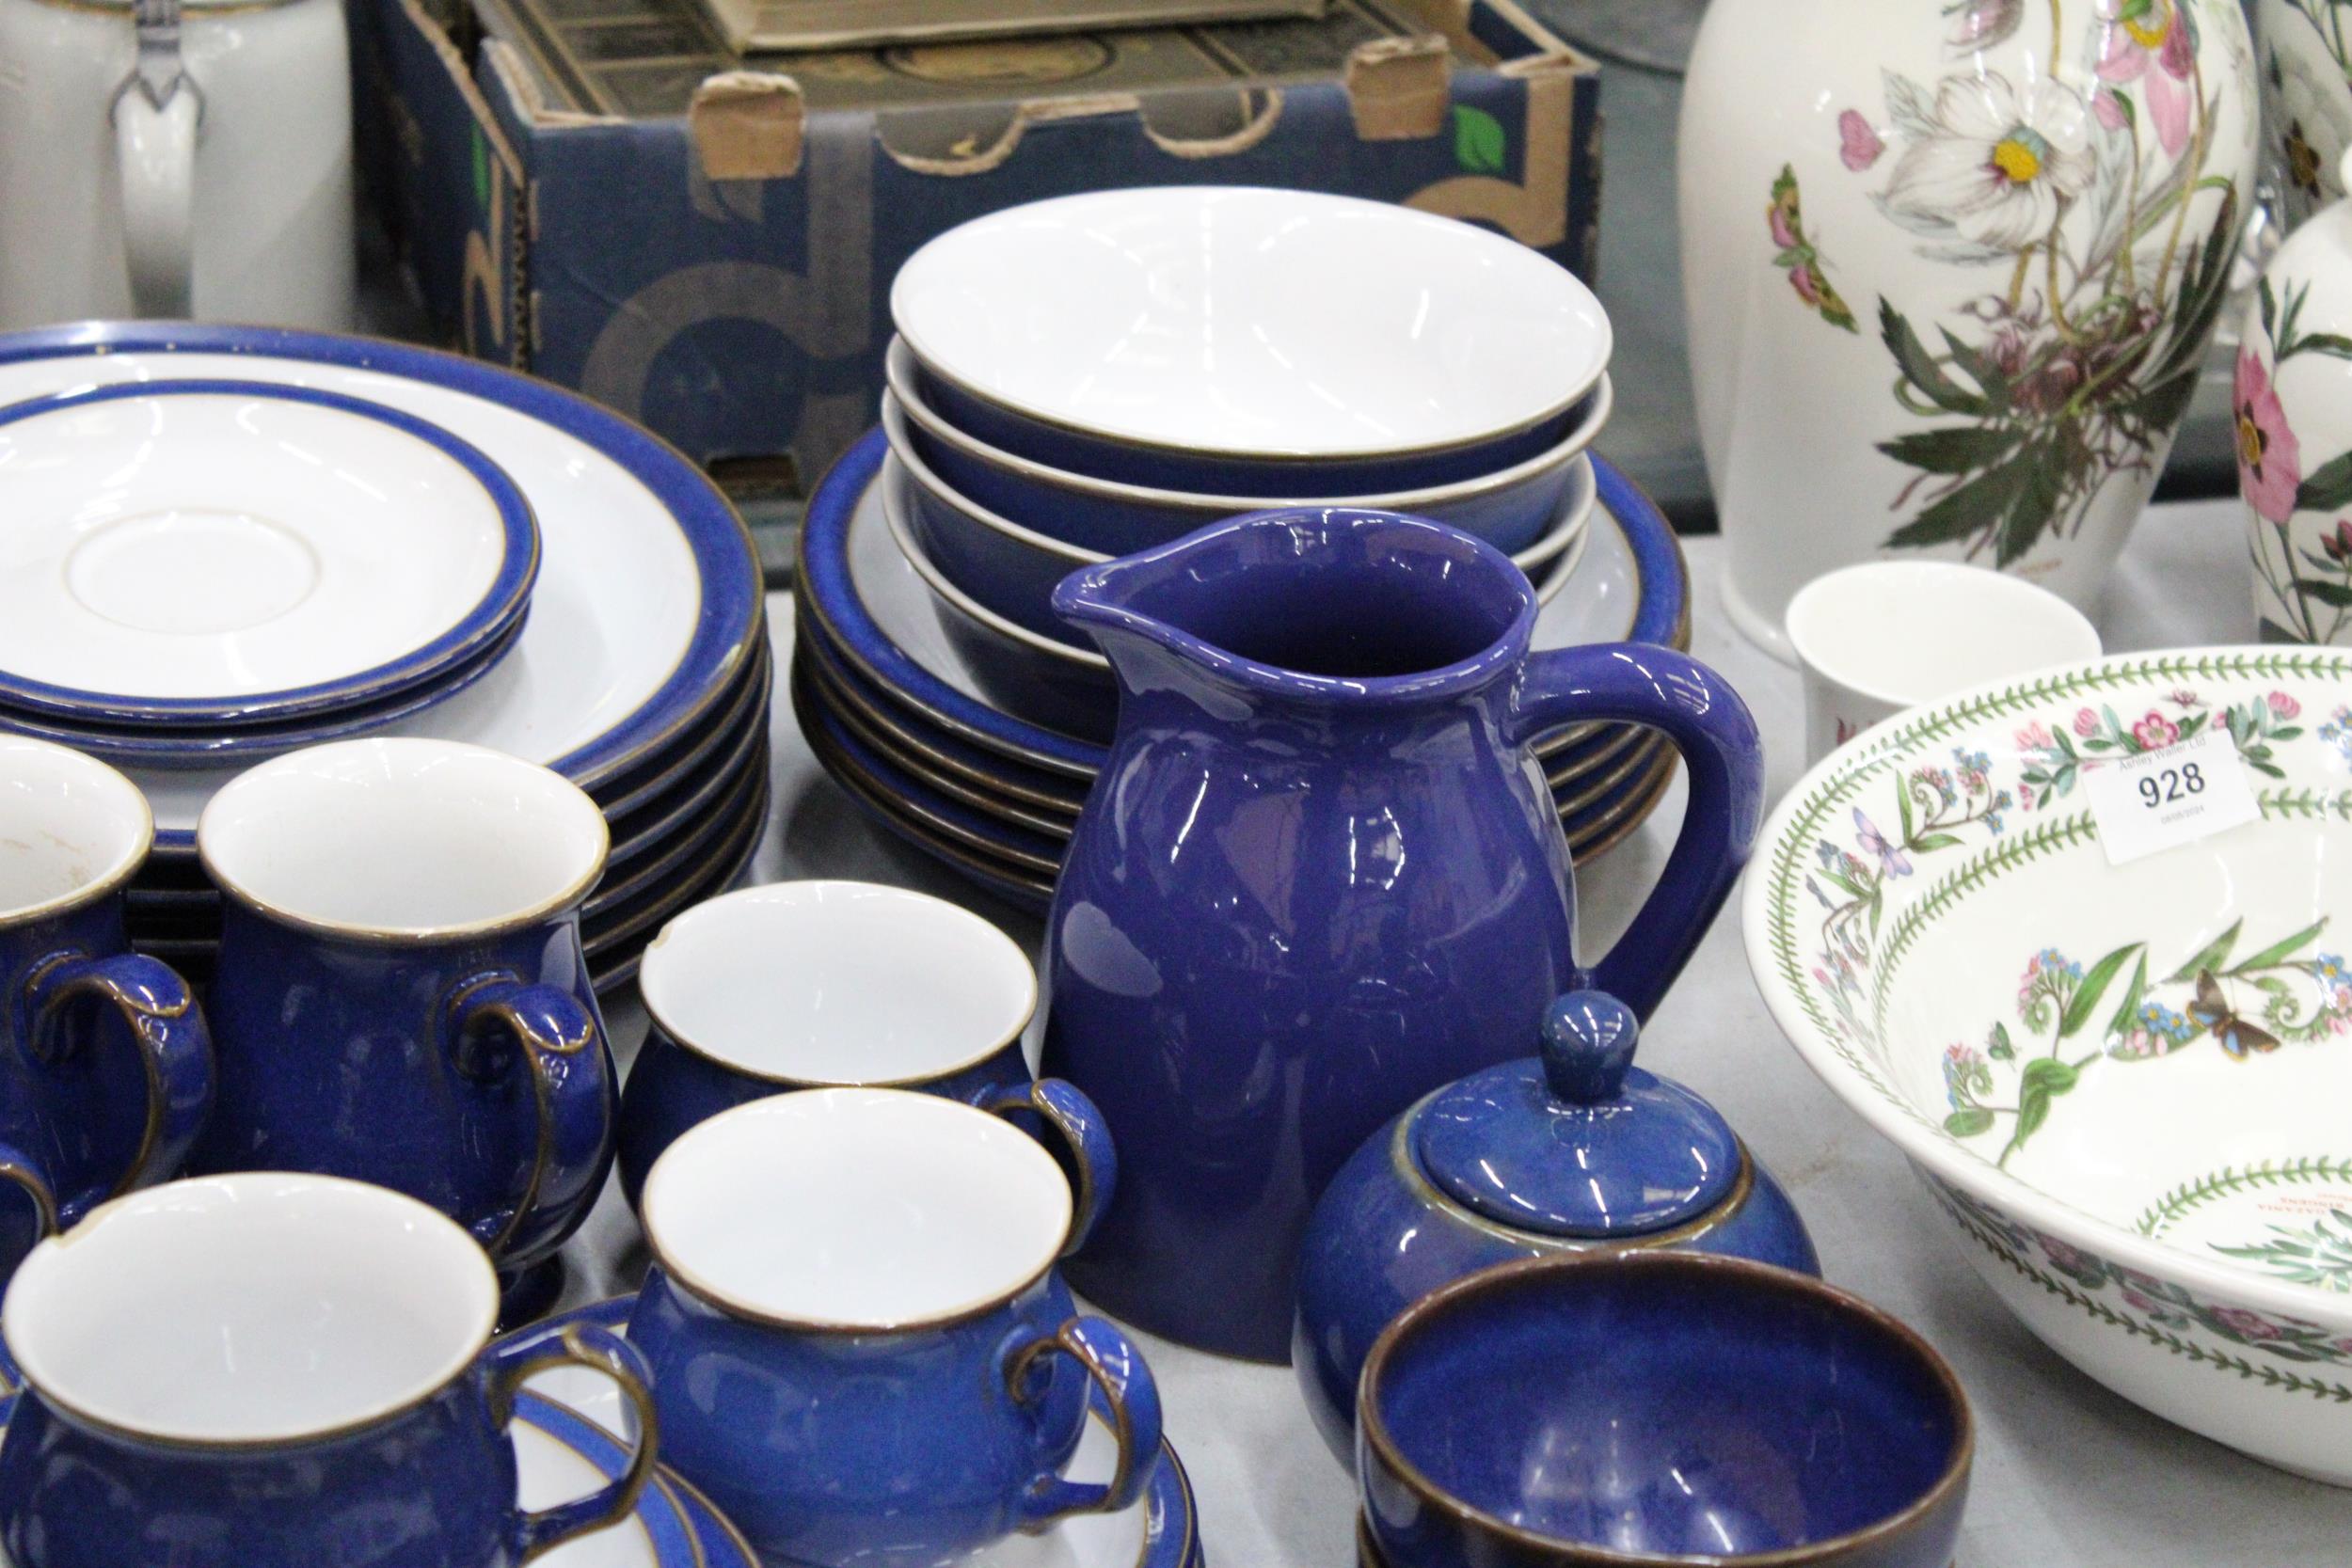 A DENBY COBALT BLUE DINNER SERVICE TO INCLUDE VARIOUS SIZES OF PLATES, BOWLS, A LARGE JUG, SUGAR - Image 4 of 5